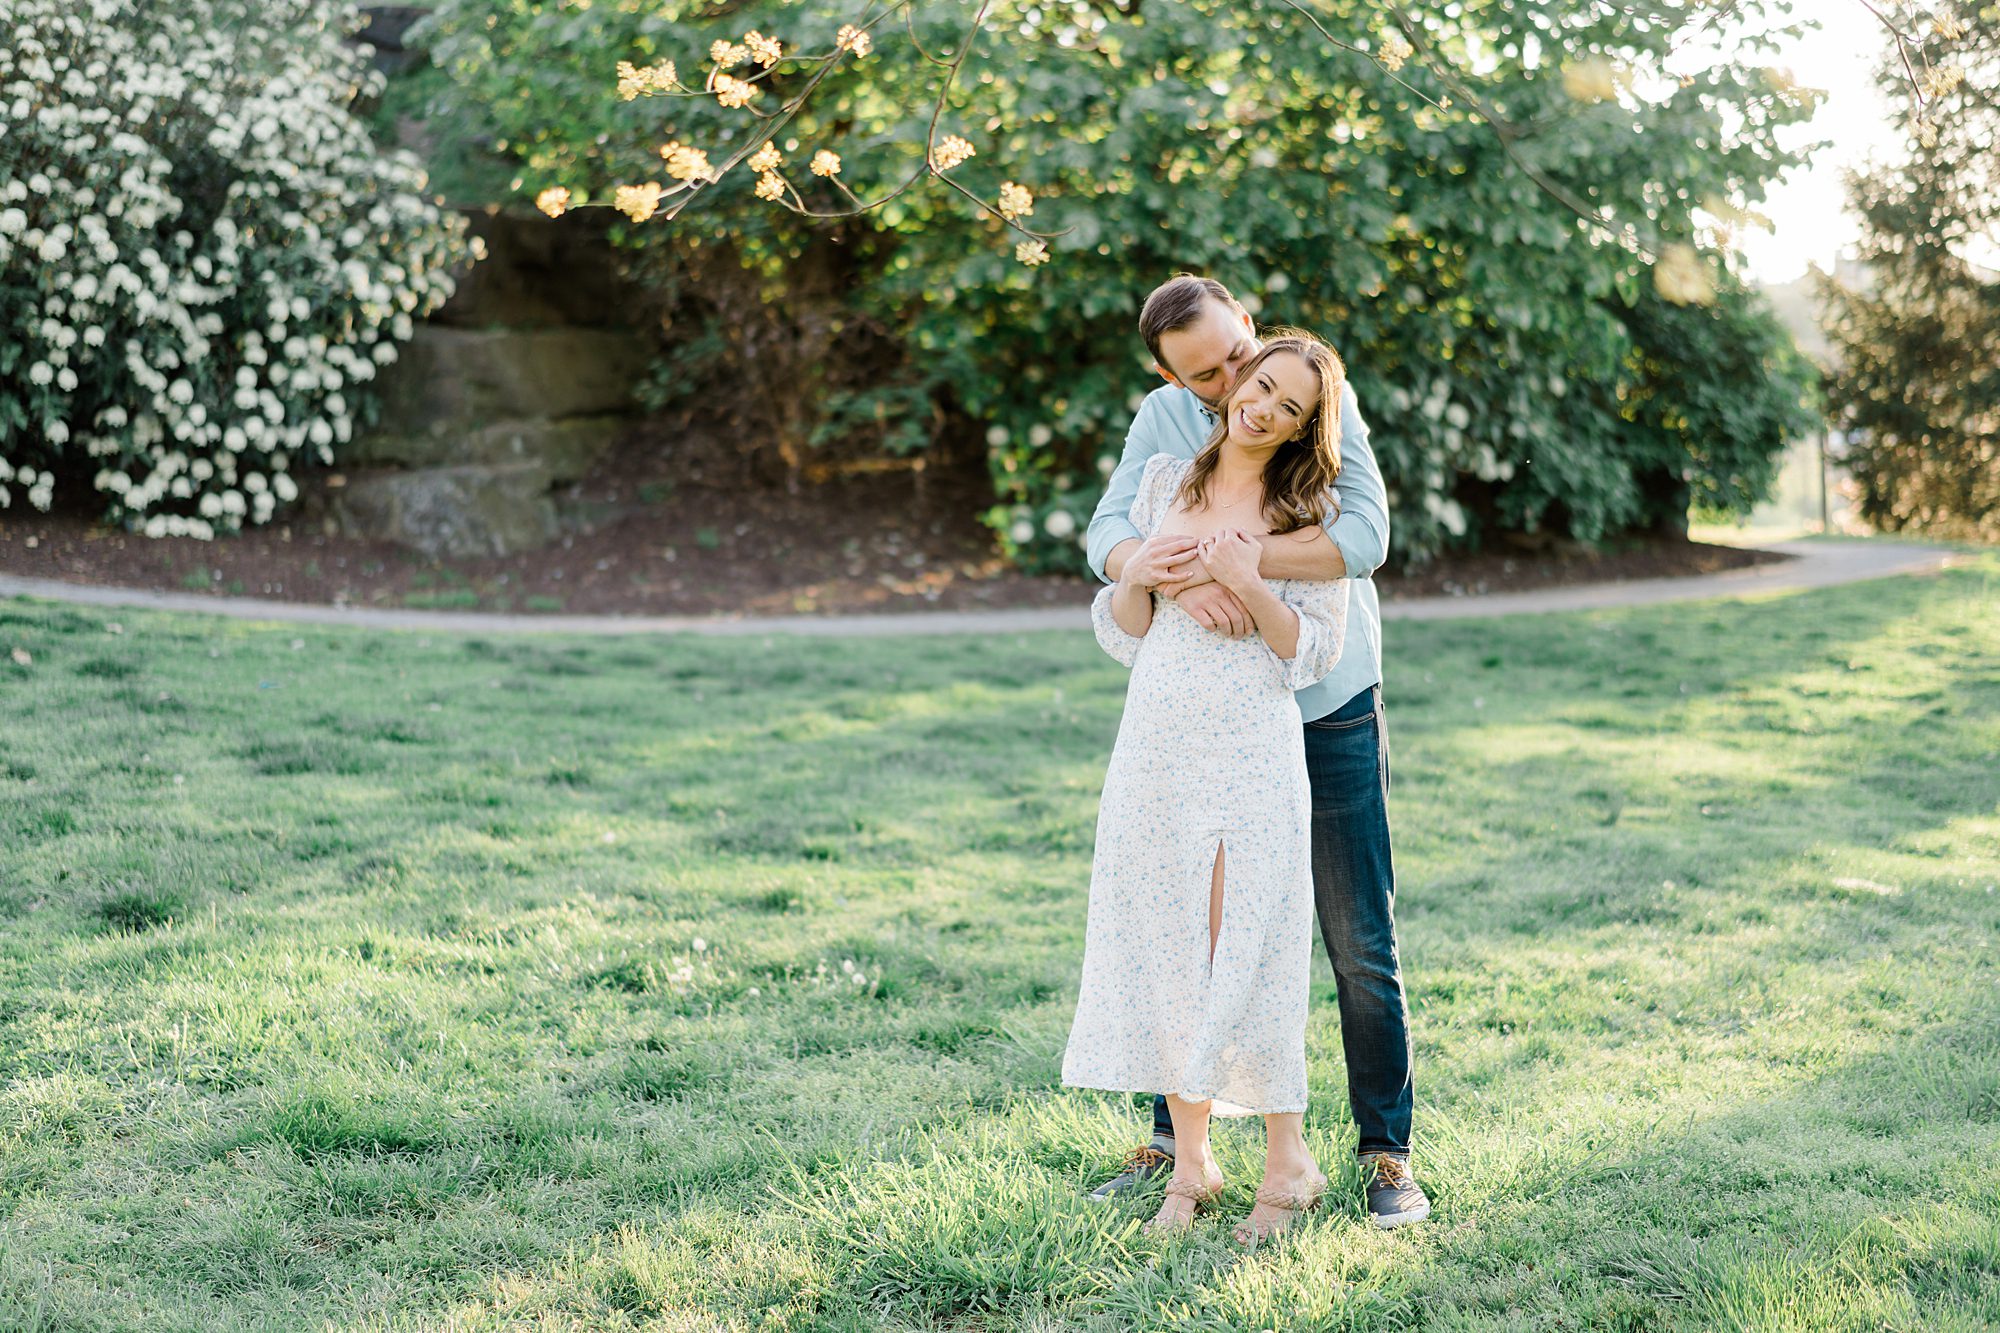 Light + Airy, romantic Philadelphia Engagement portraits by Amber Dawn Photography 